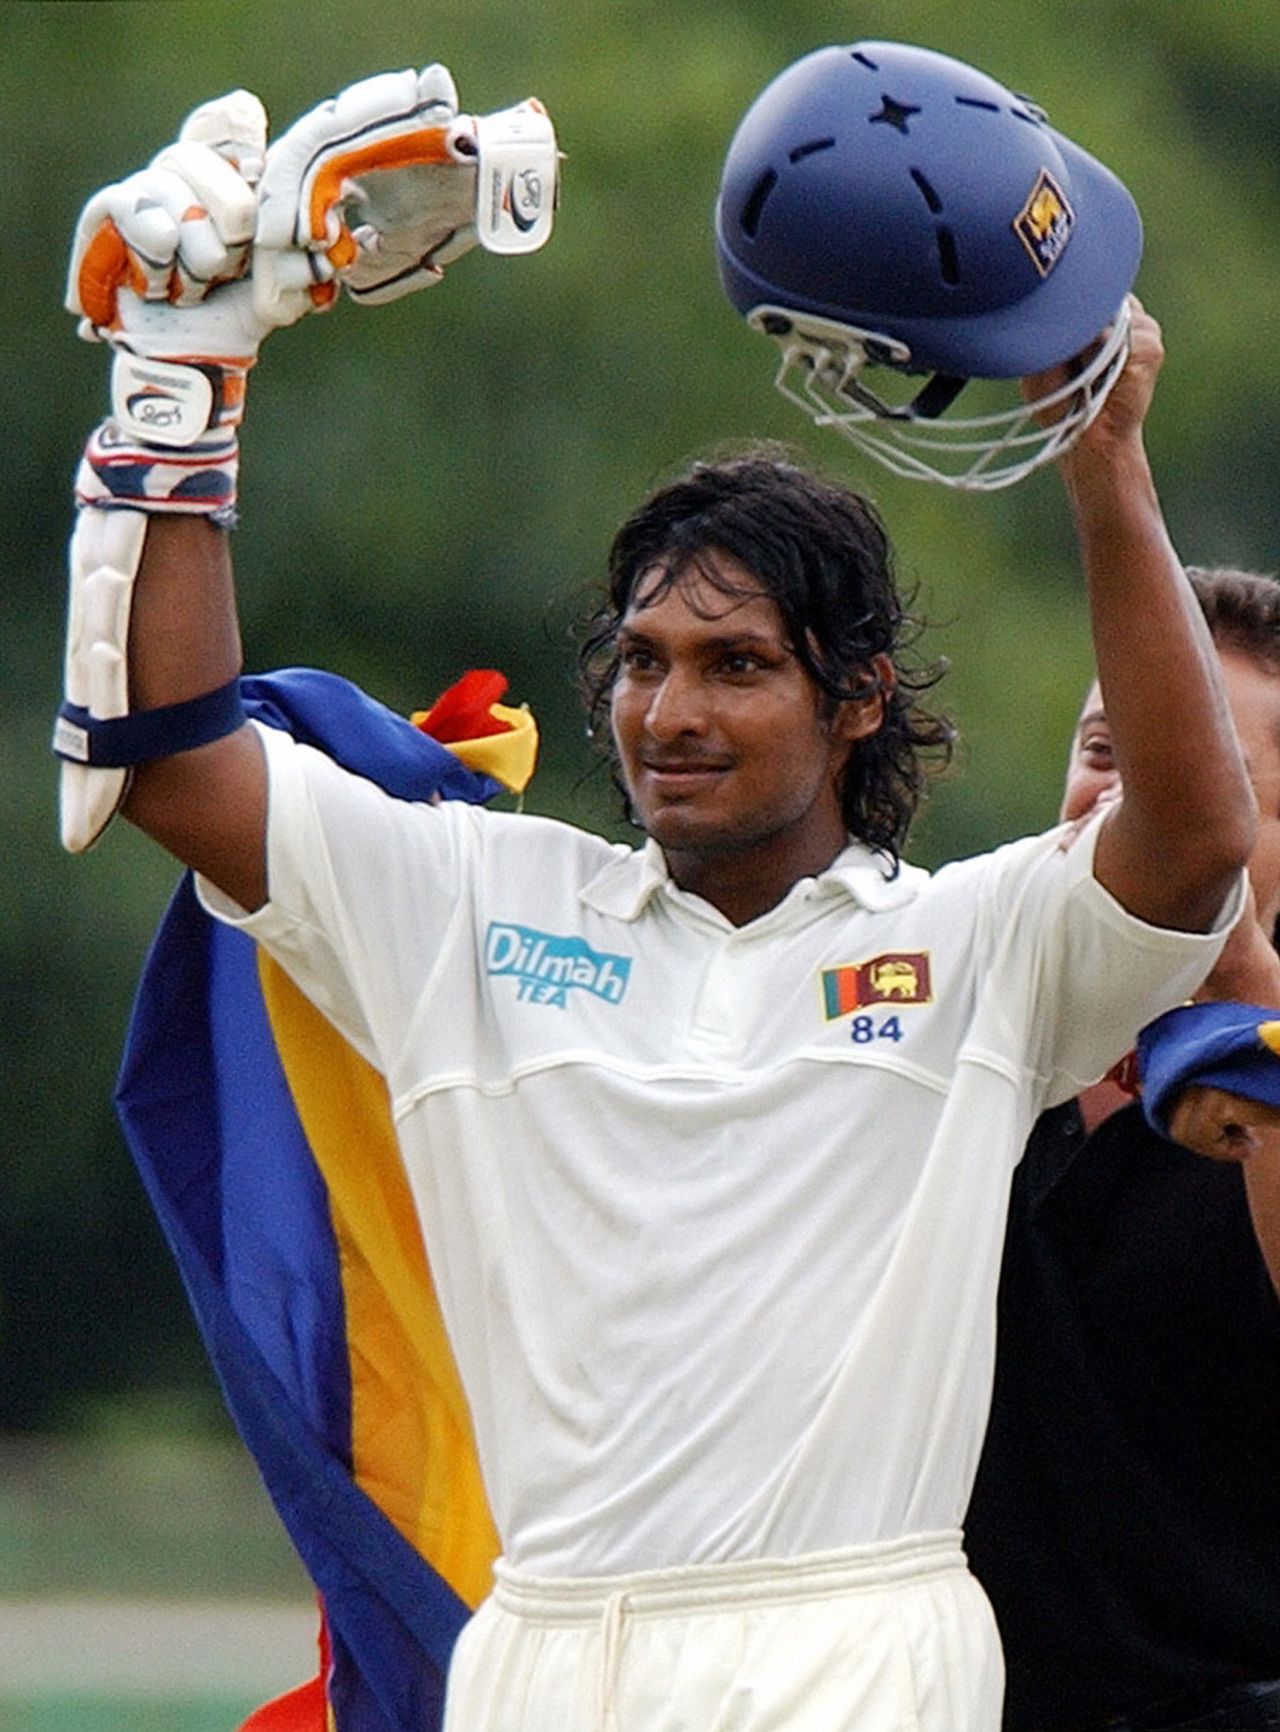 Kumar Sangakkara acknowledges the crowd after completing 100 runs during the third day's play of the second and final Test match between Sri Lanka and the West Indies at the Asgiriya cricket grounds in Kandy, 24 July 2005